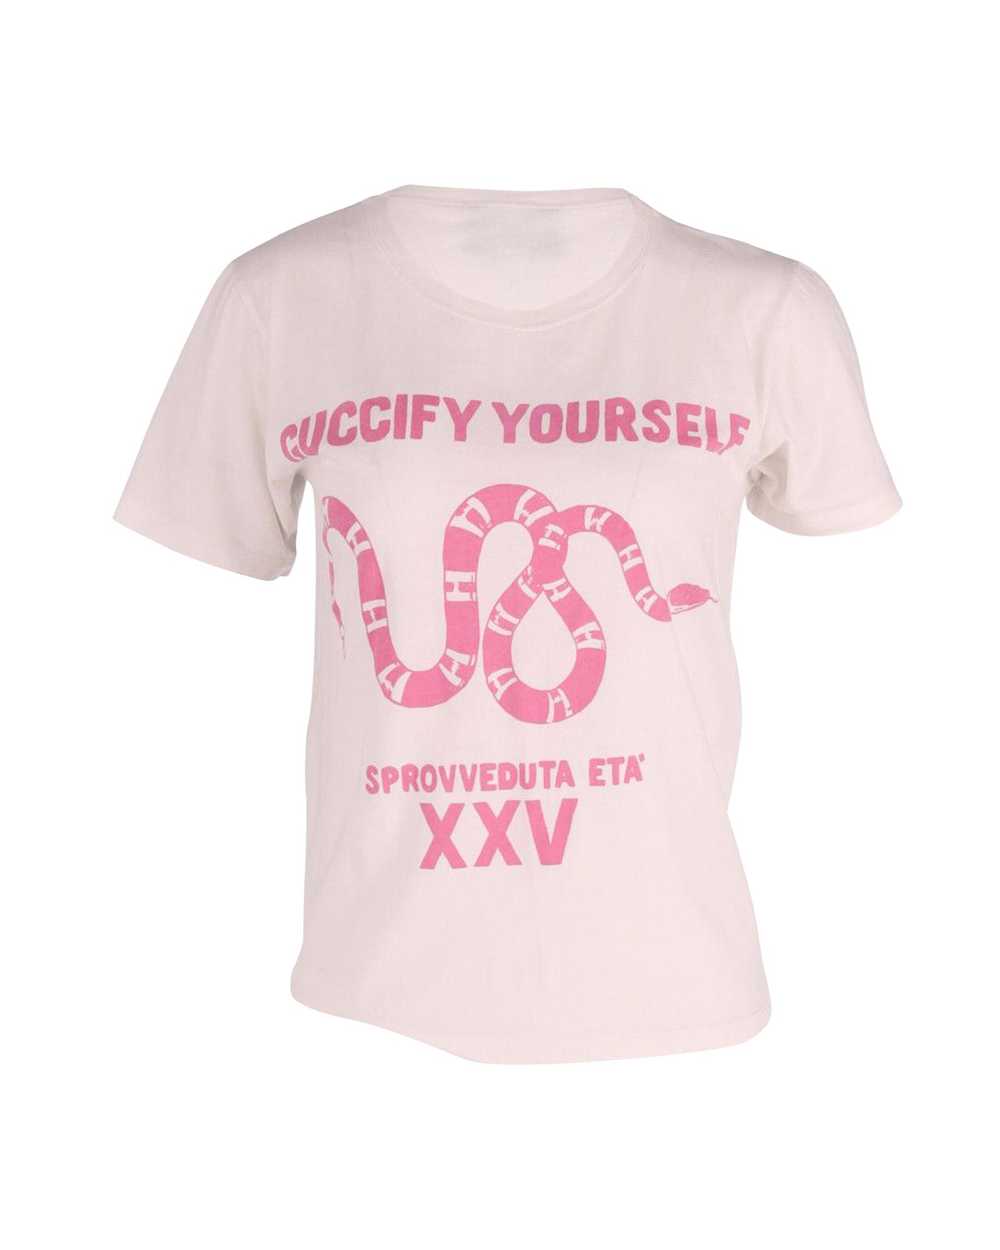 Product Details Guccify Yourself White Cotton T-S… - image 2